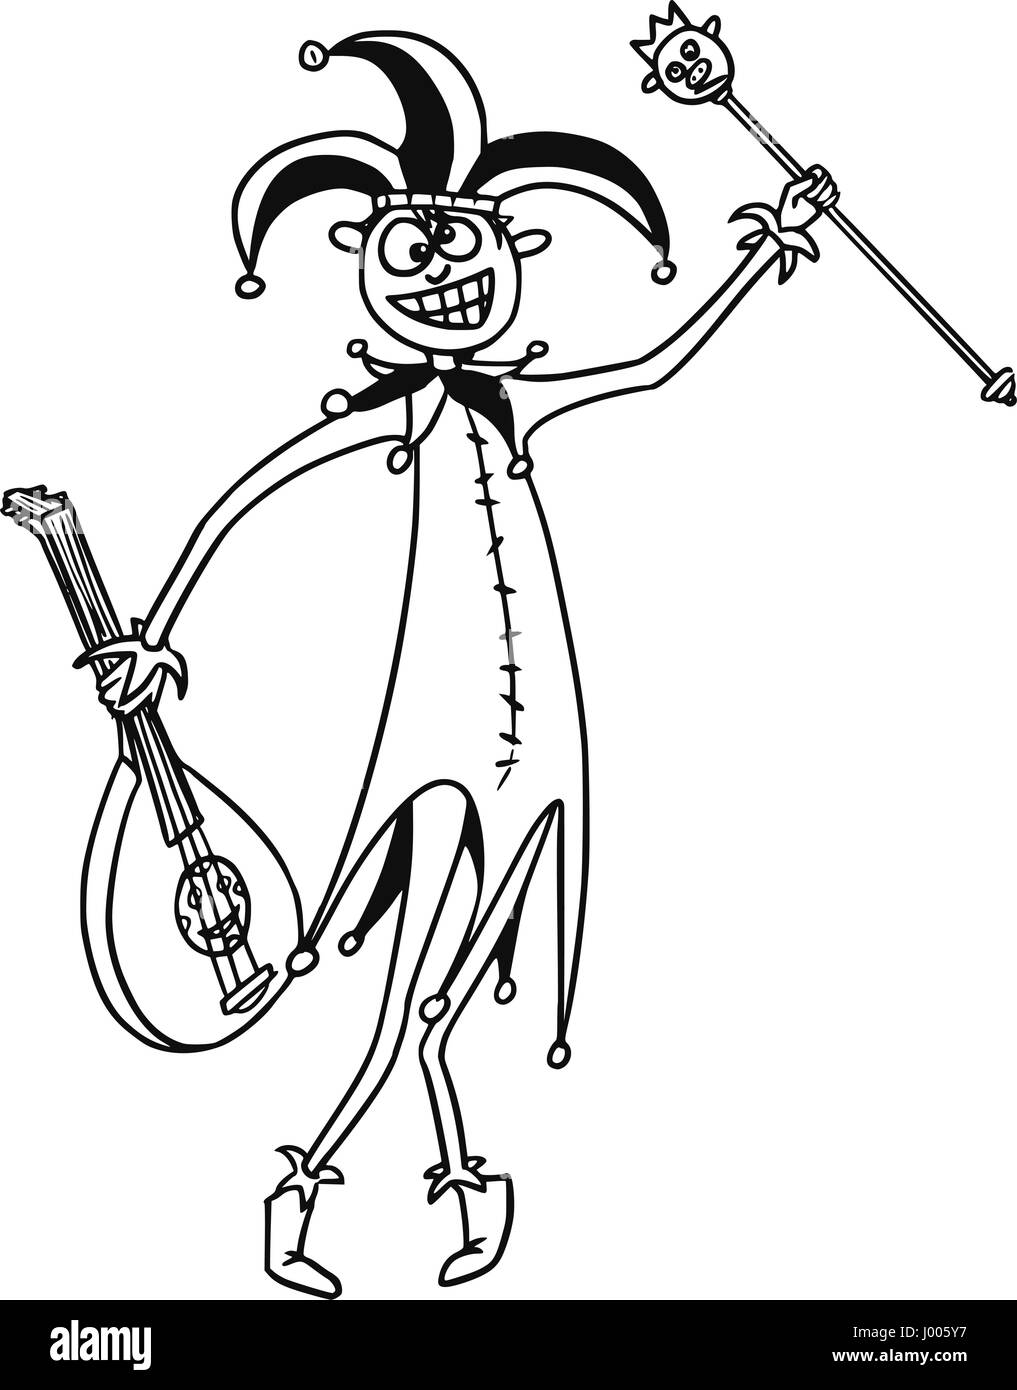 Cartoon vector  fantasy medieval jester fool clown buffoon with hat, scepter and zither or guitar Stock Vector